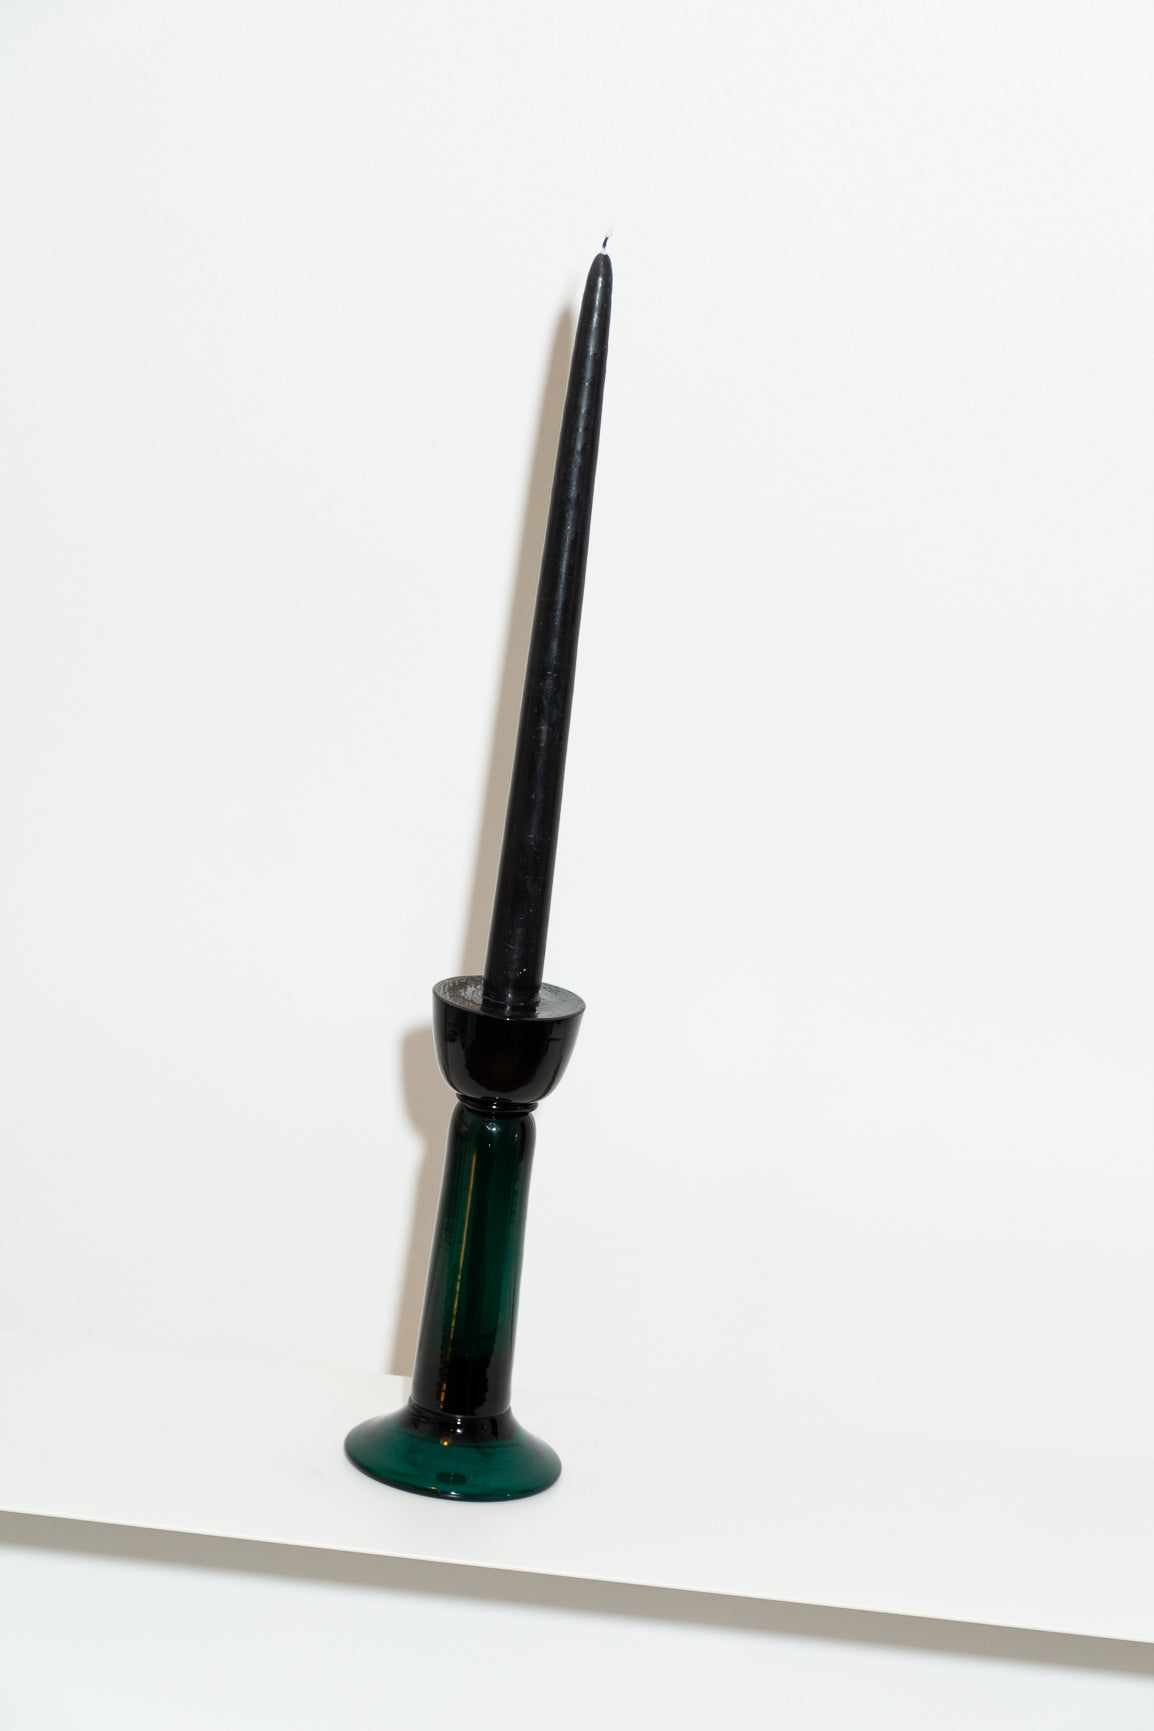 Green Glass Candle Stick